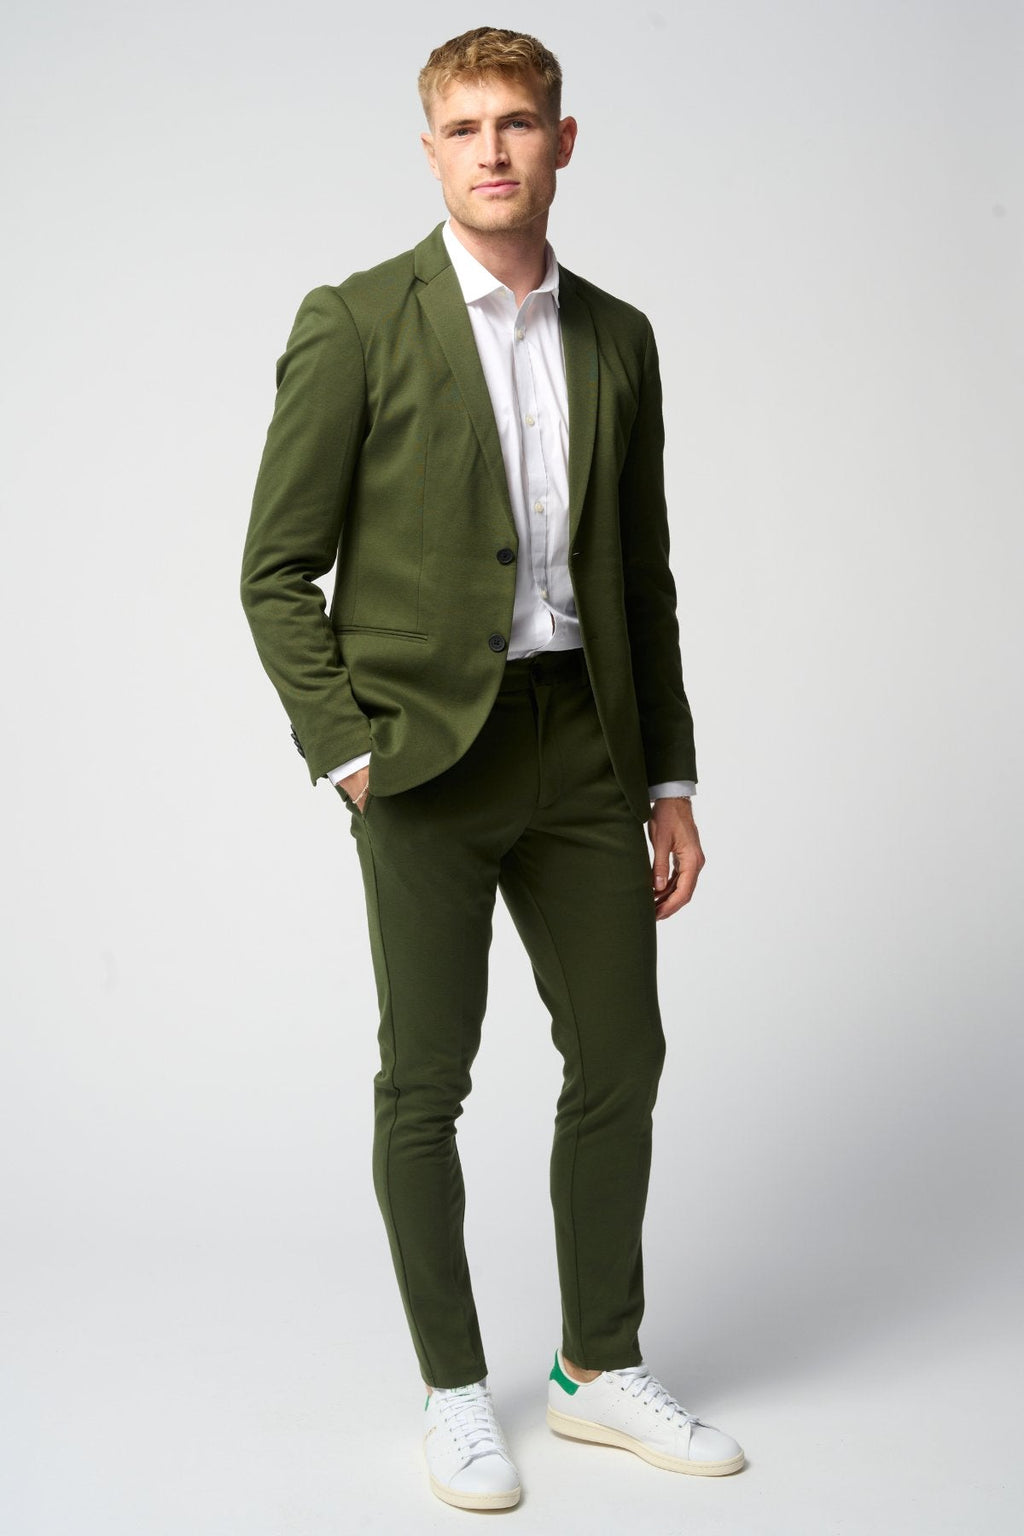 The Original Performance Suit™️ (Dark Green) + Shirt & Tie - Package Deal (V.I.P)